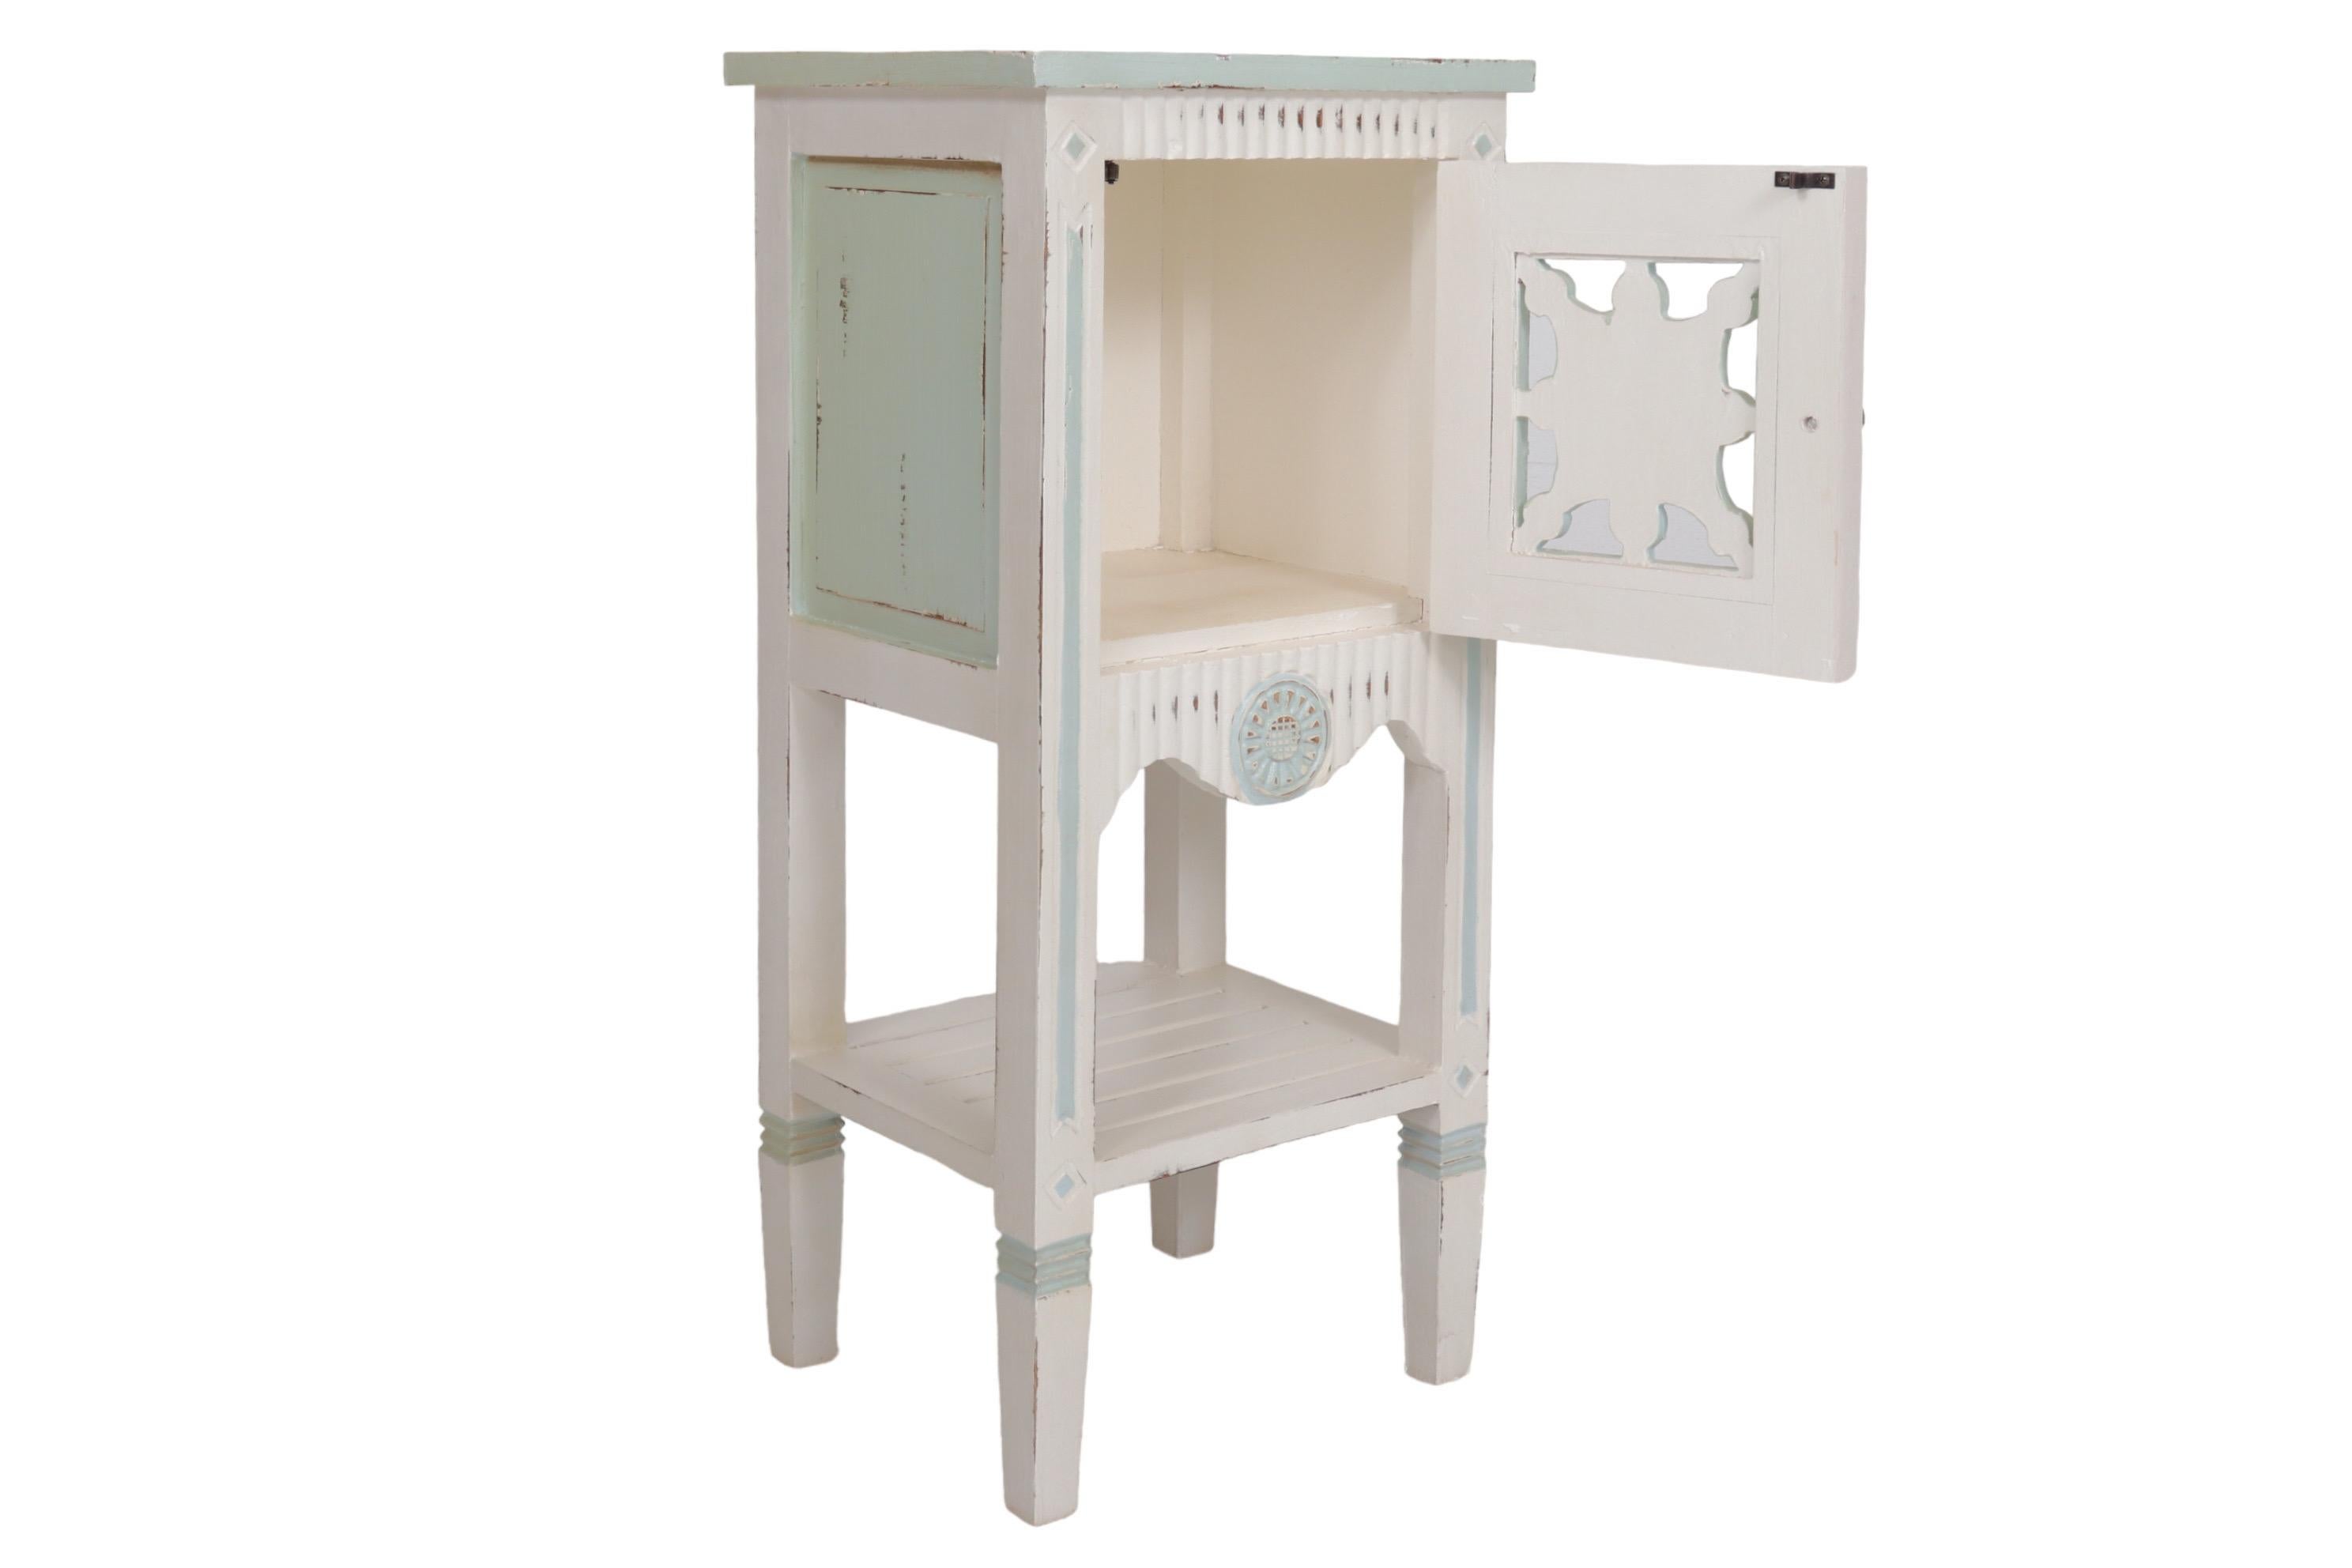 A shabby chic side table made of solid wood and painted in white with teal details. The cabinet door is pierced and decorated with a simply carved sunflower motif that repeats on the reeded skirt below. Straight square legs support a slatted shelf